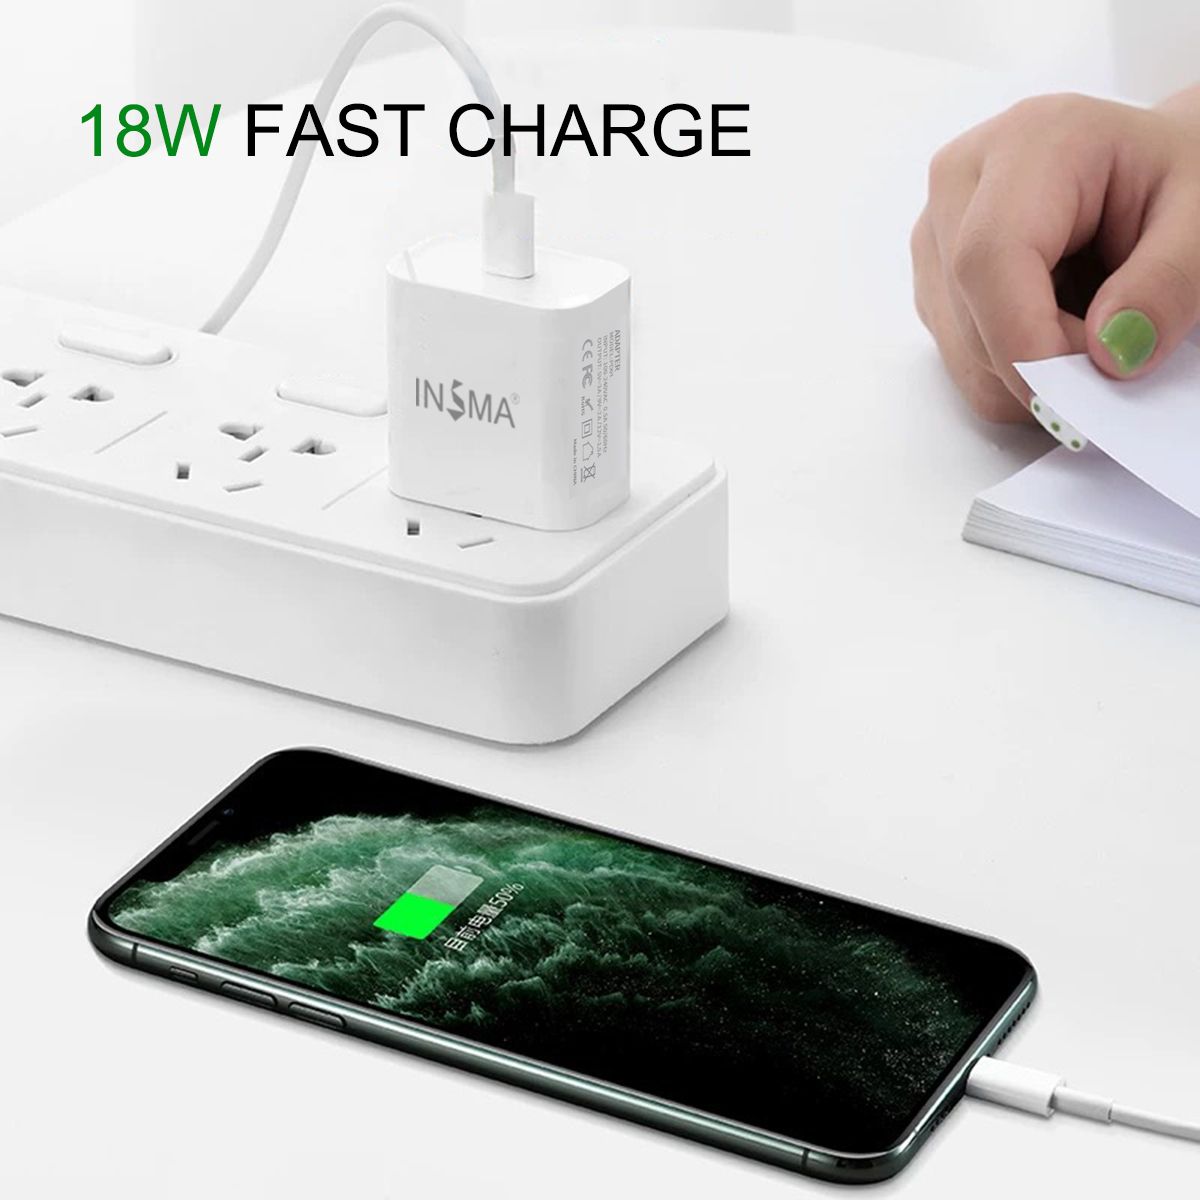 INSMA-18W-Fast-Charger-PD30-USB-Charger-Type-C-Adapter-For-iPhone-8-X-XS-11-Pro-1606517